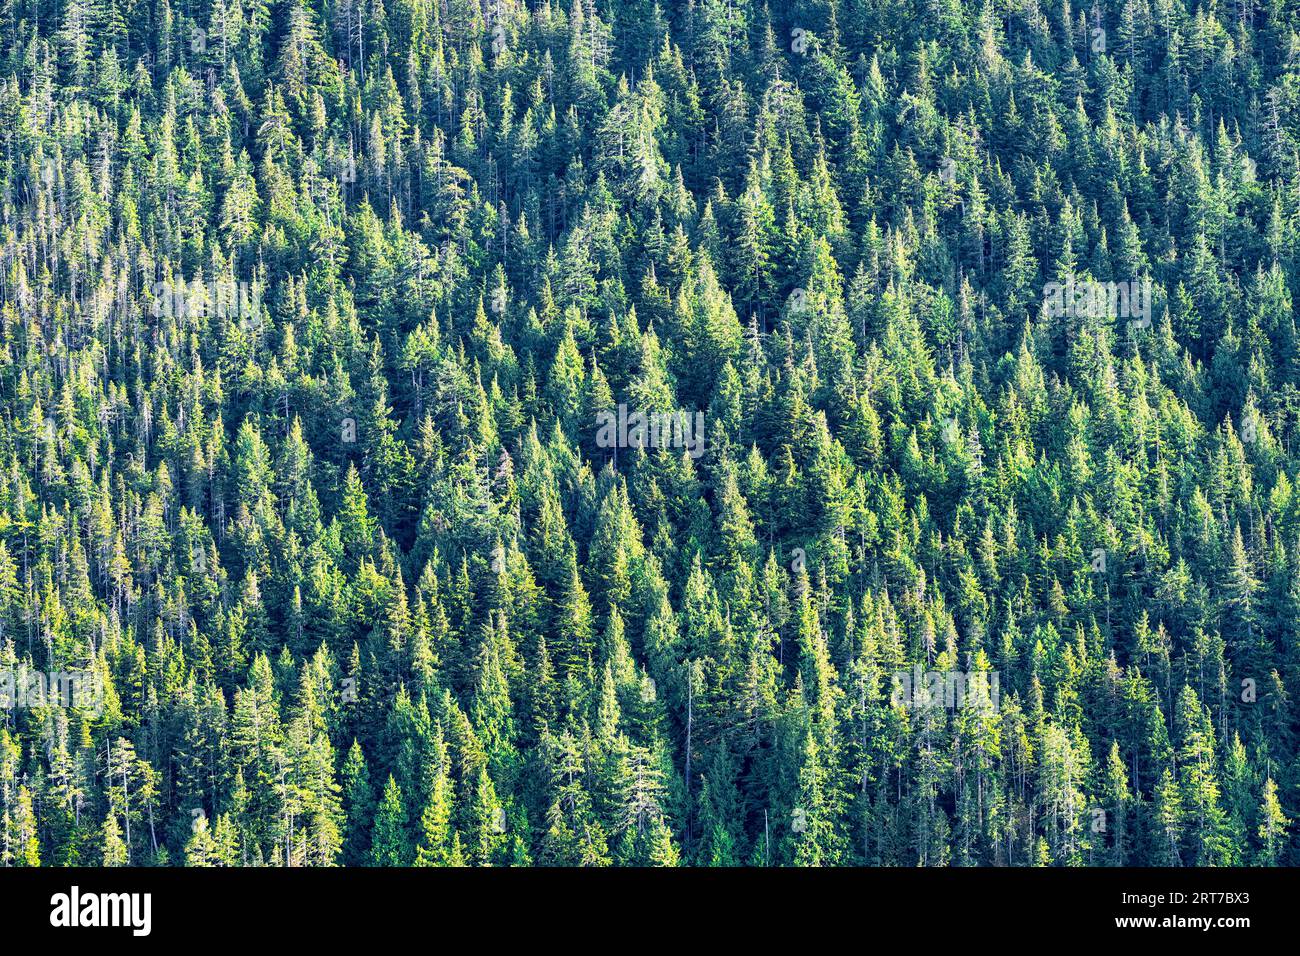 Vancouver Island mountainside with coniferous forest for sustainable logging, seen from 'Inside Passage' cruise to Alaska. Stock Photo